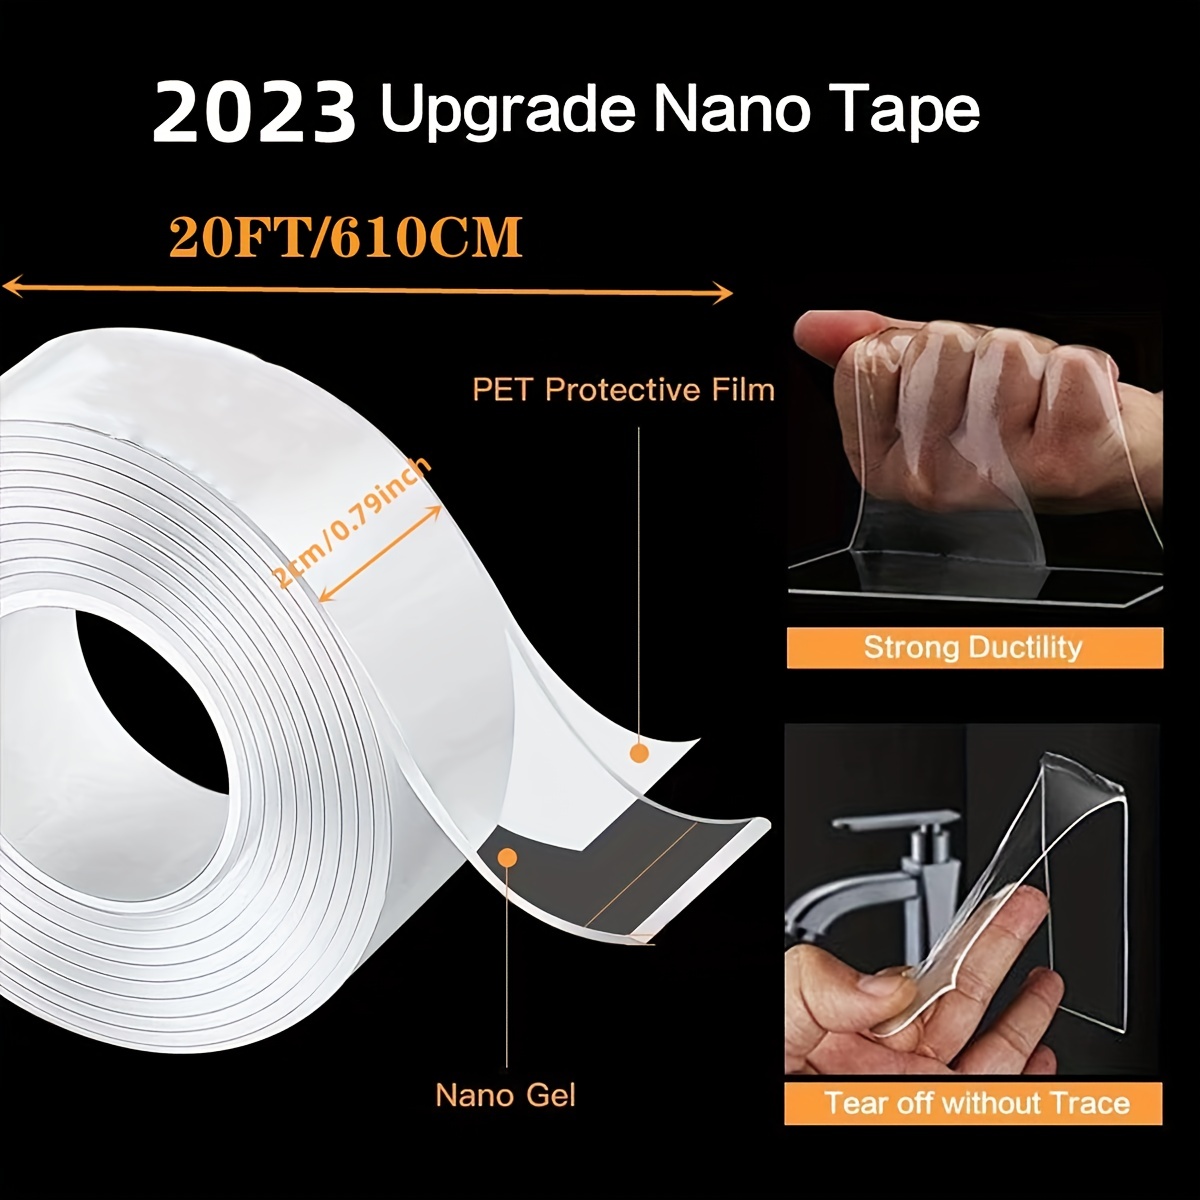 Strong Double Sided Tape Heavy Duty in 2023